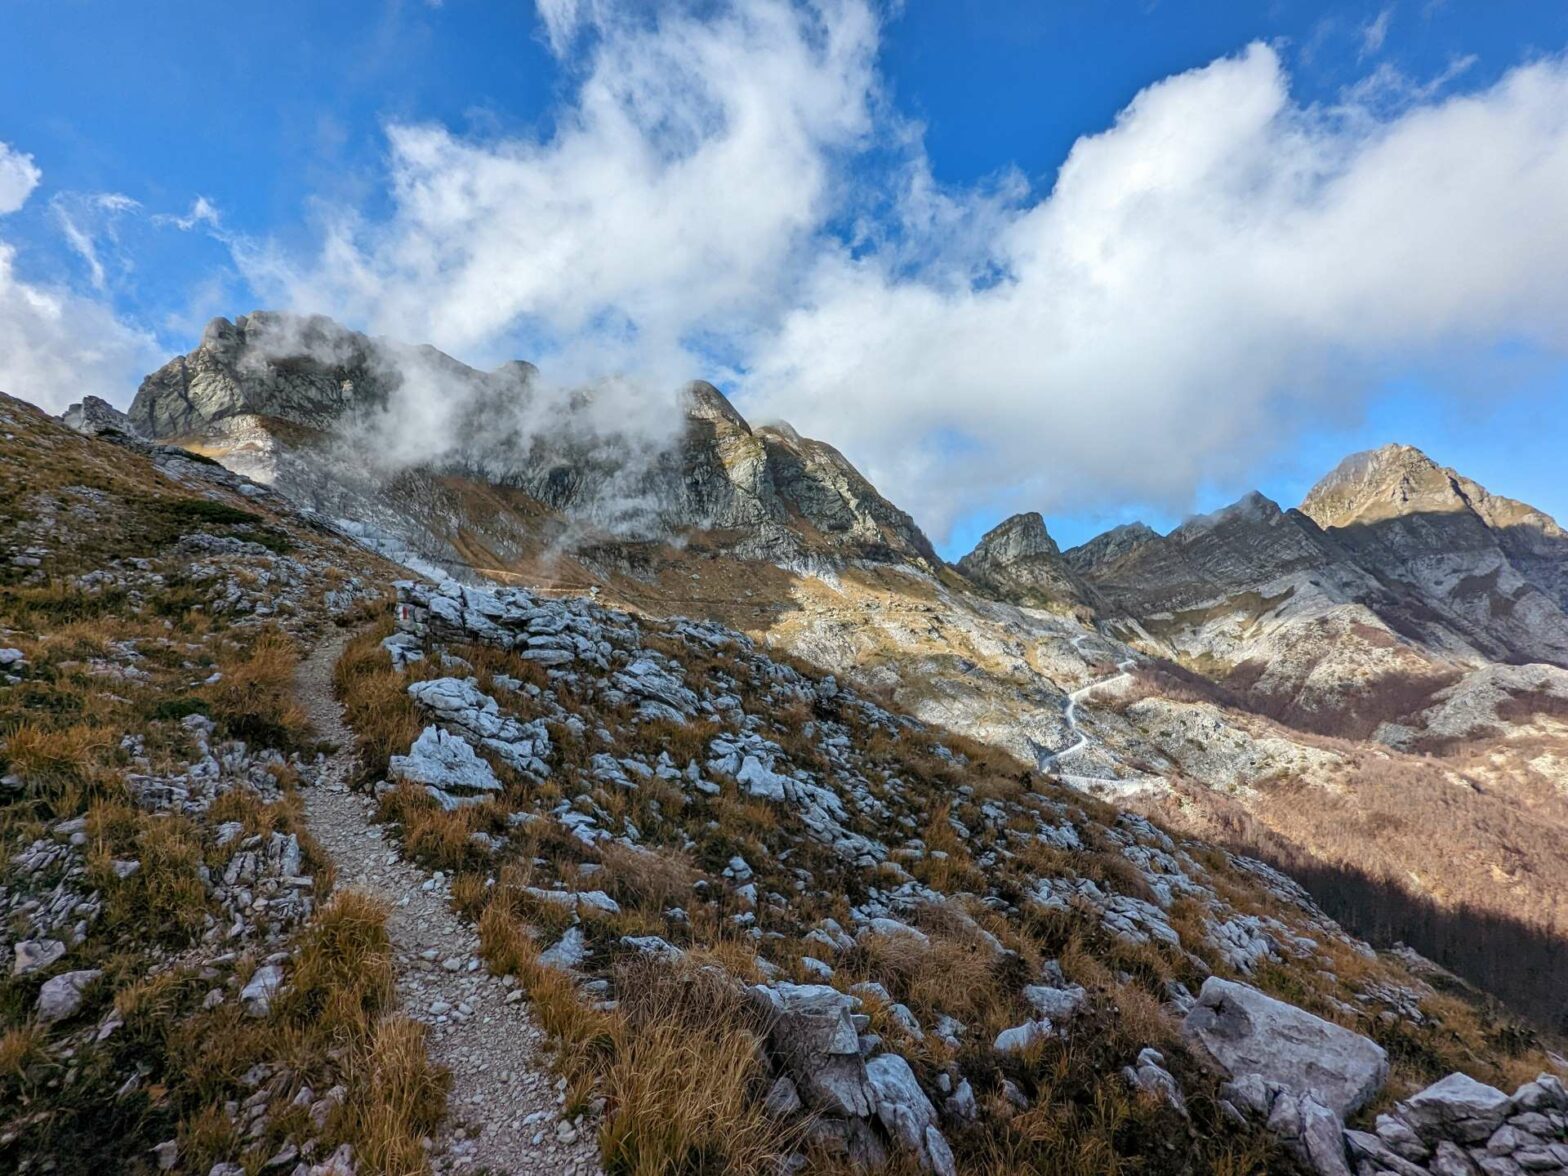 Hiking in the Apuan Alps